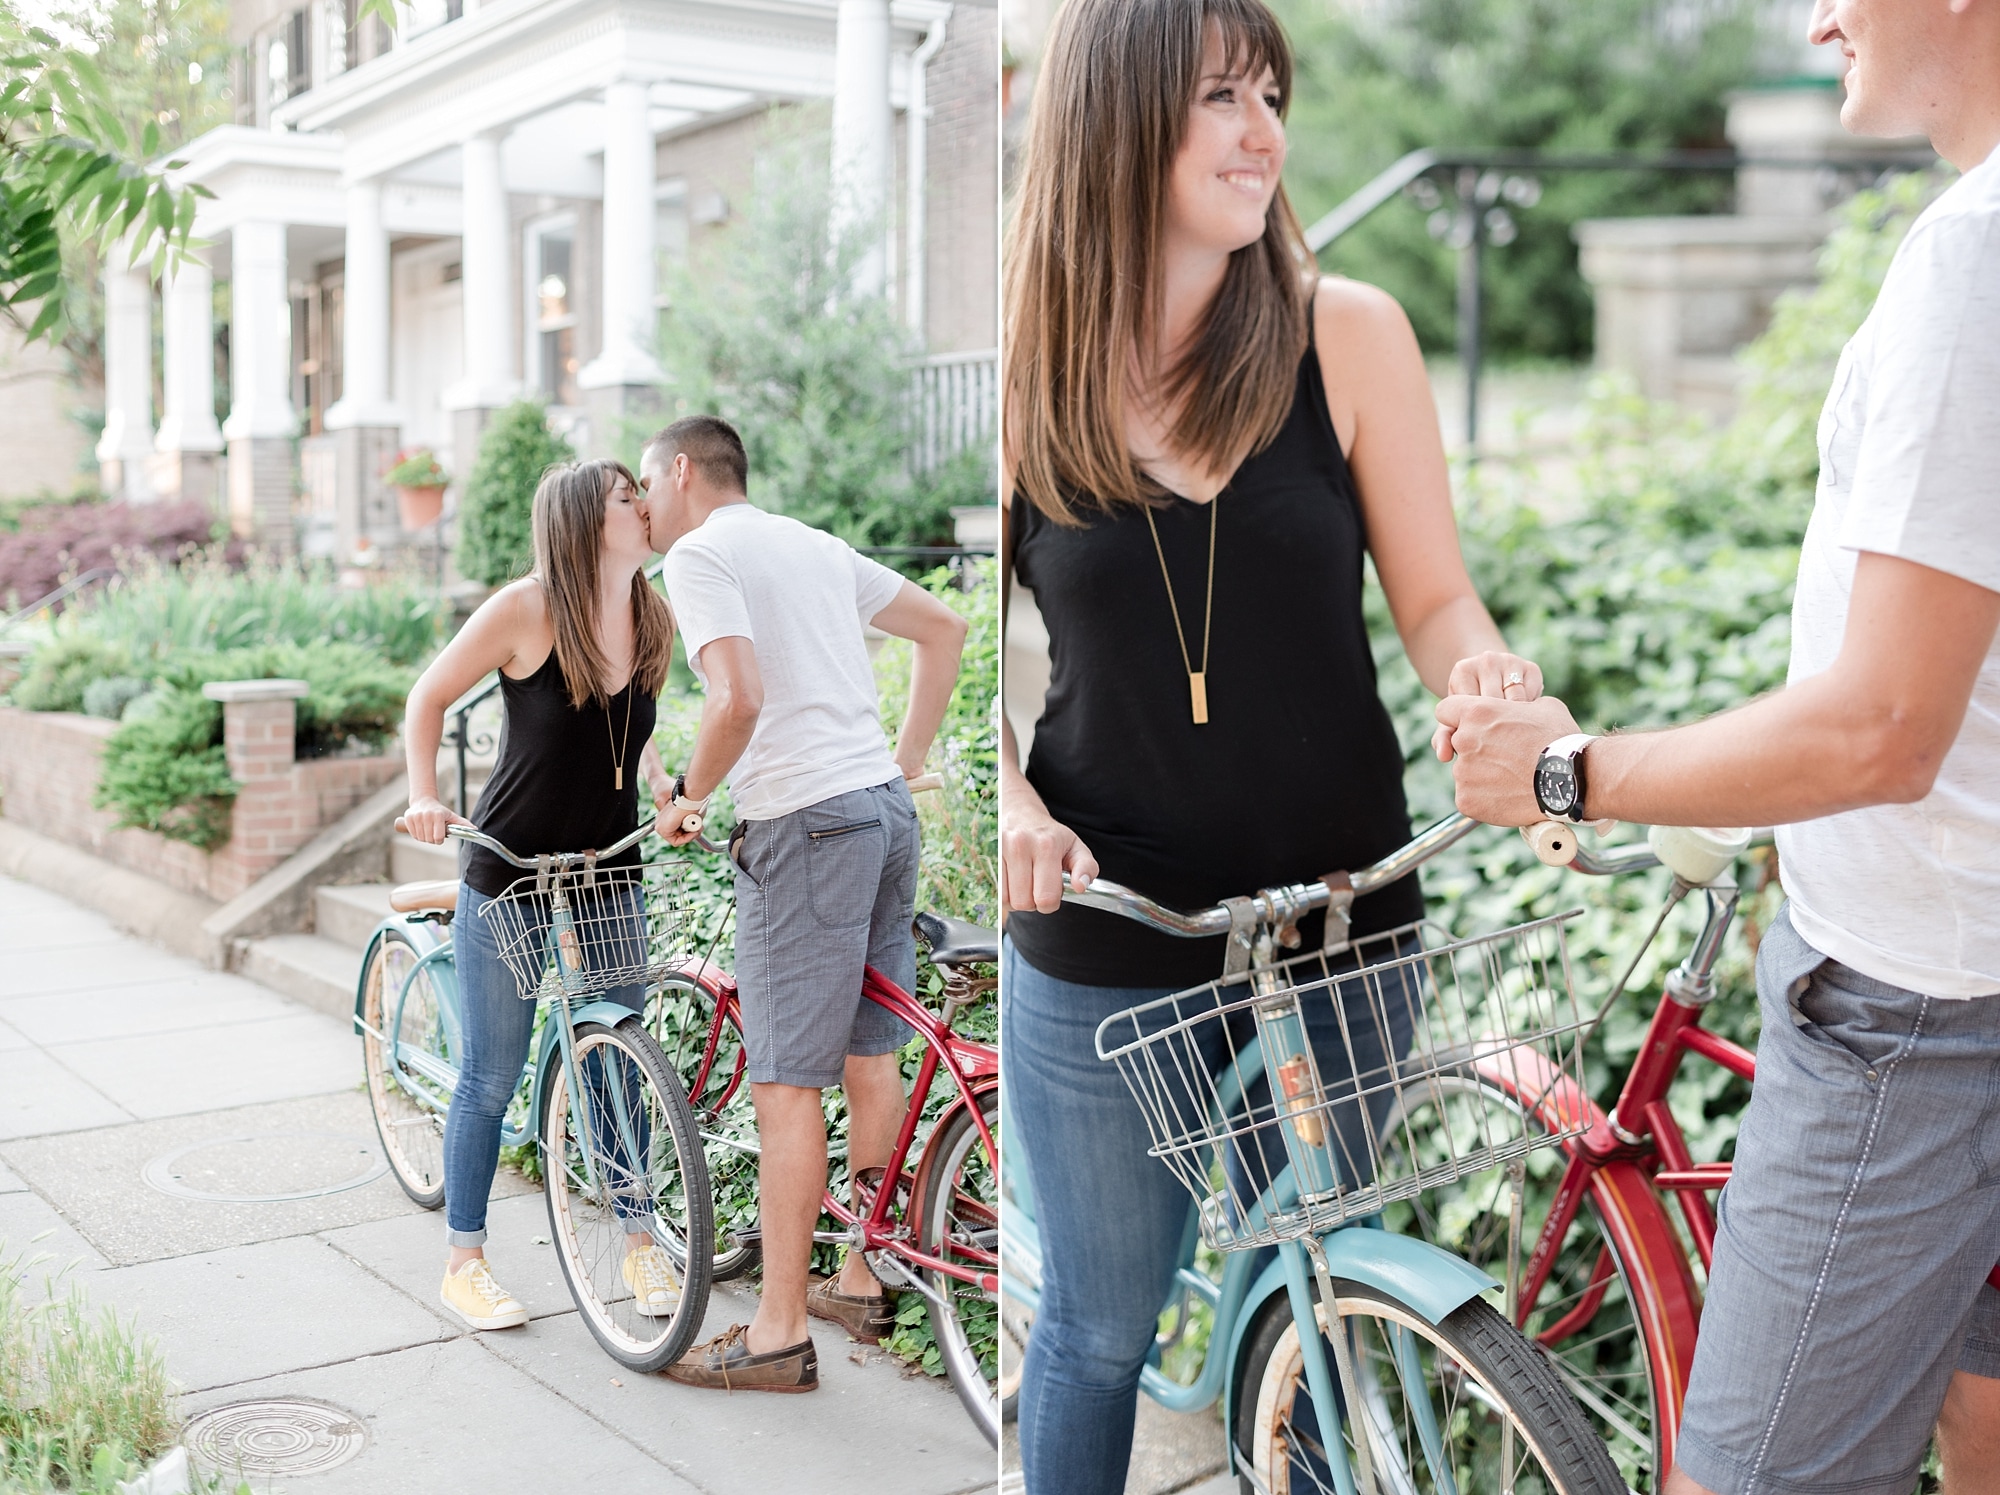 Bike photos at an engagement session in DC